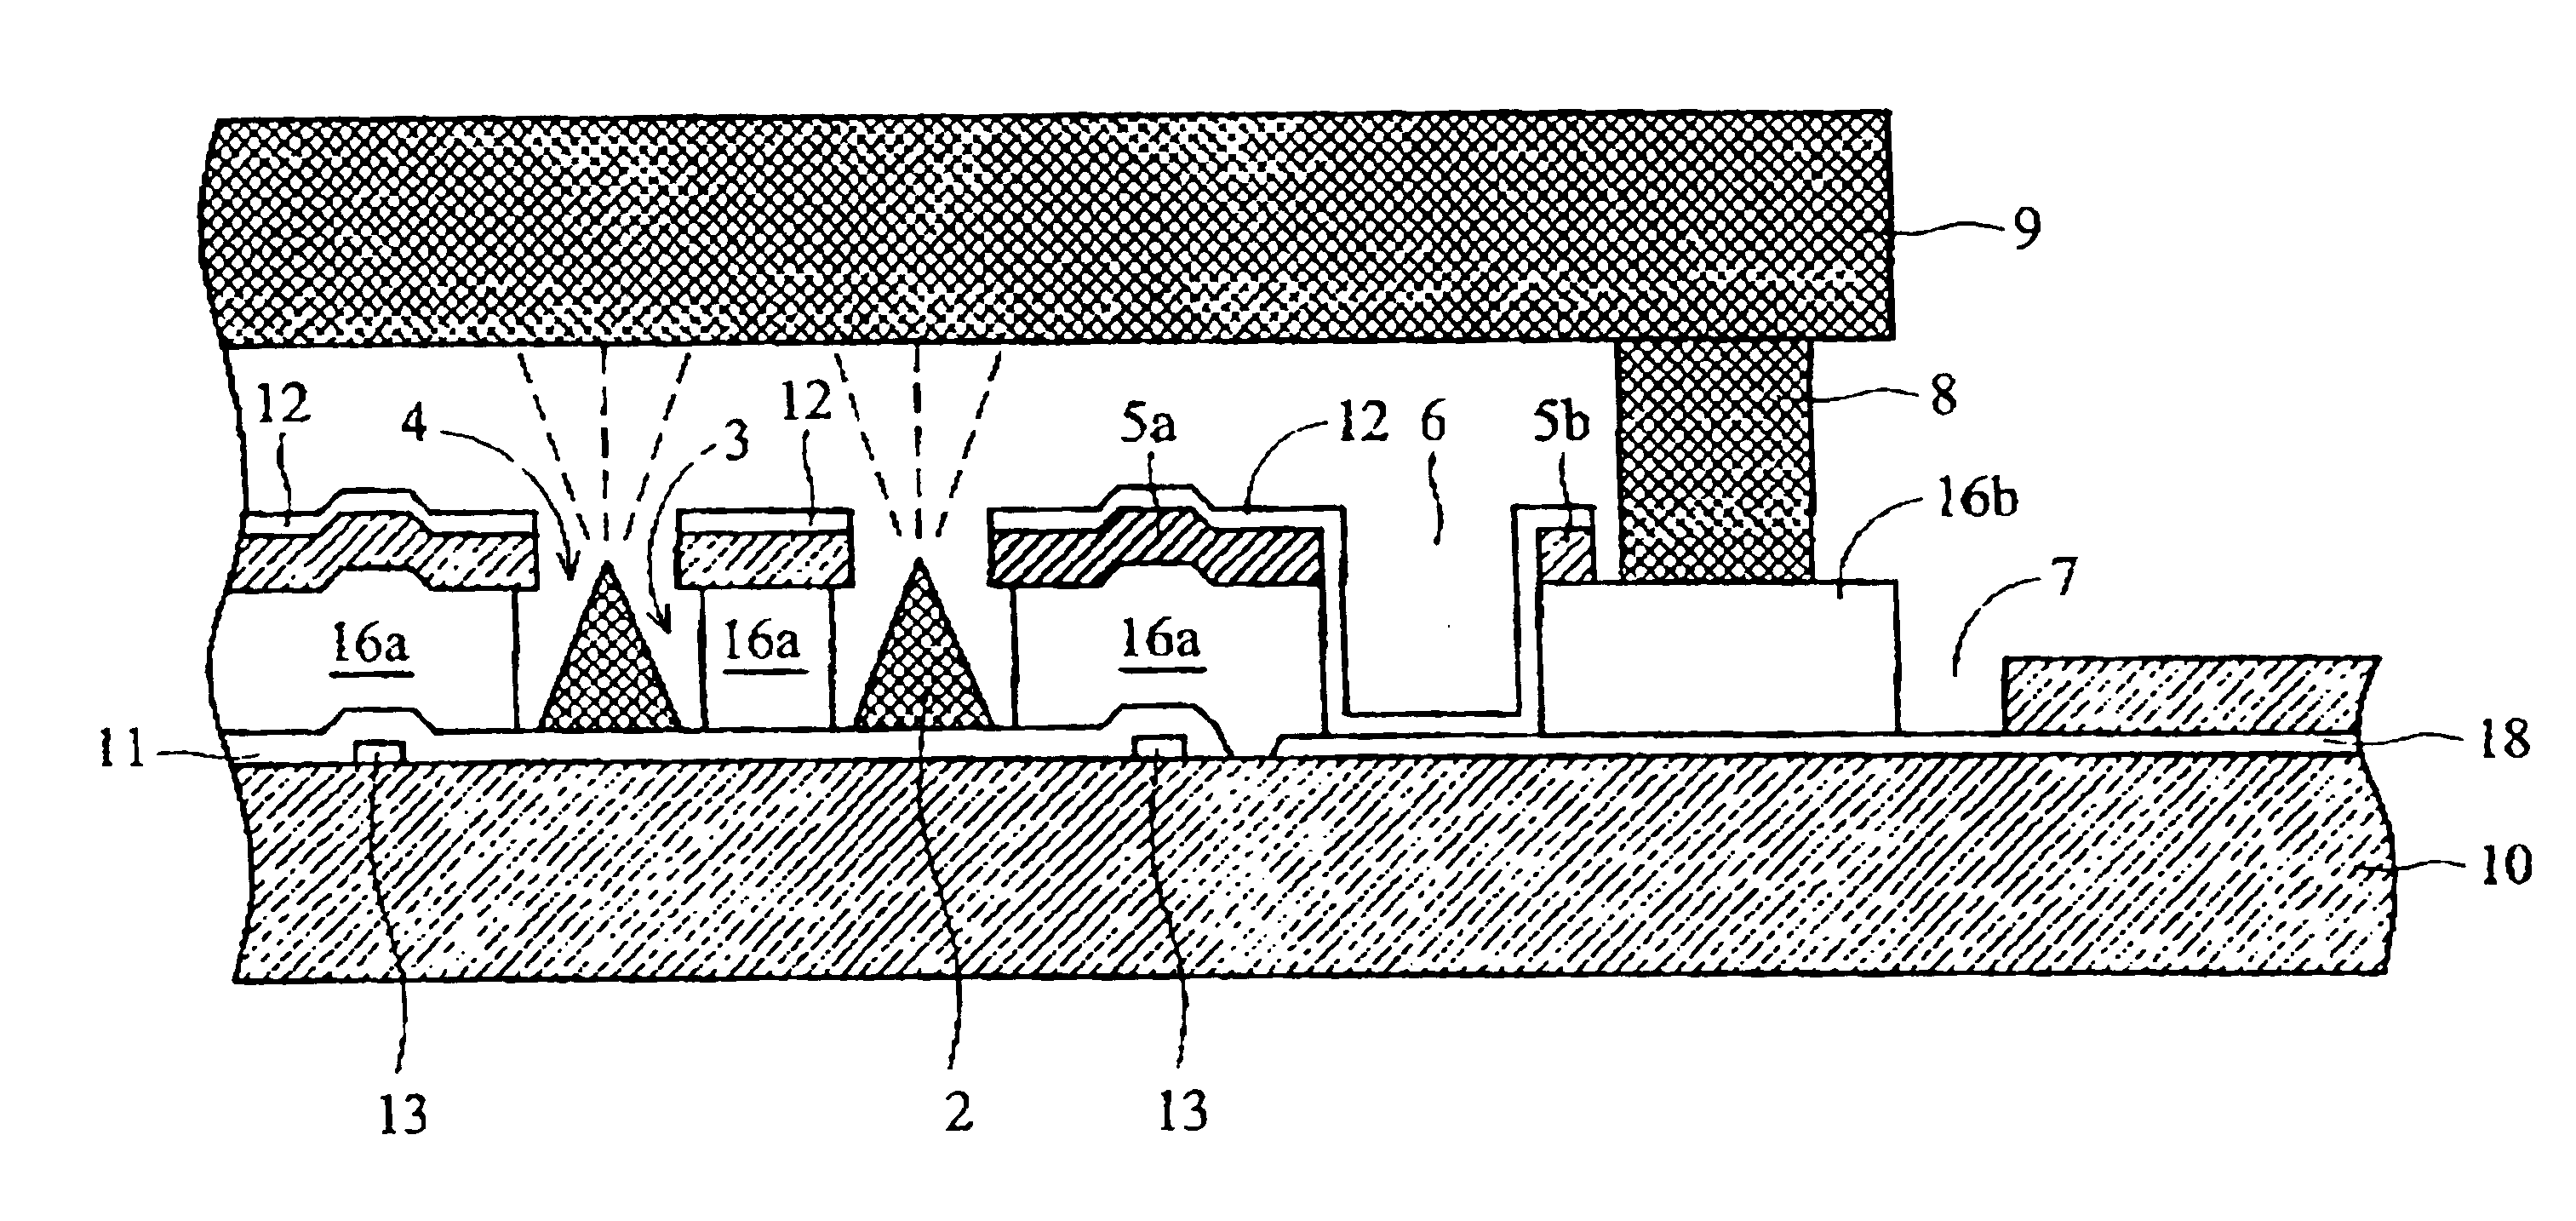 Field emission display cathode (FED) plate with an internal via and the fabrication method for the cathode plate